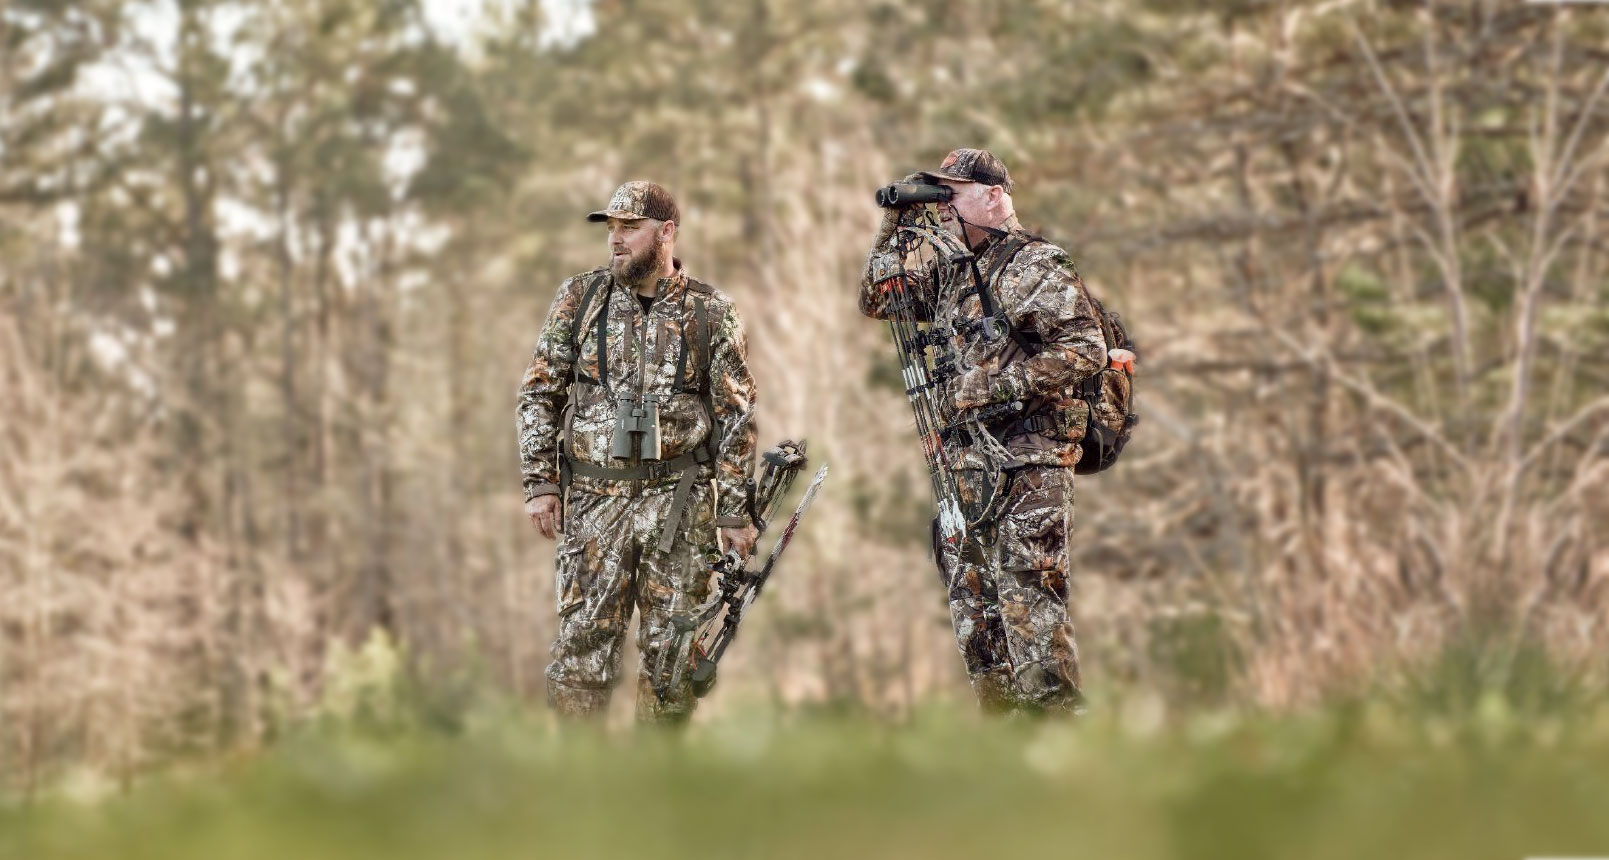 Hunting Camo Patterns 101: Types of Camo & More